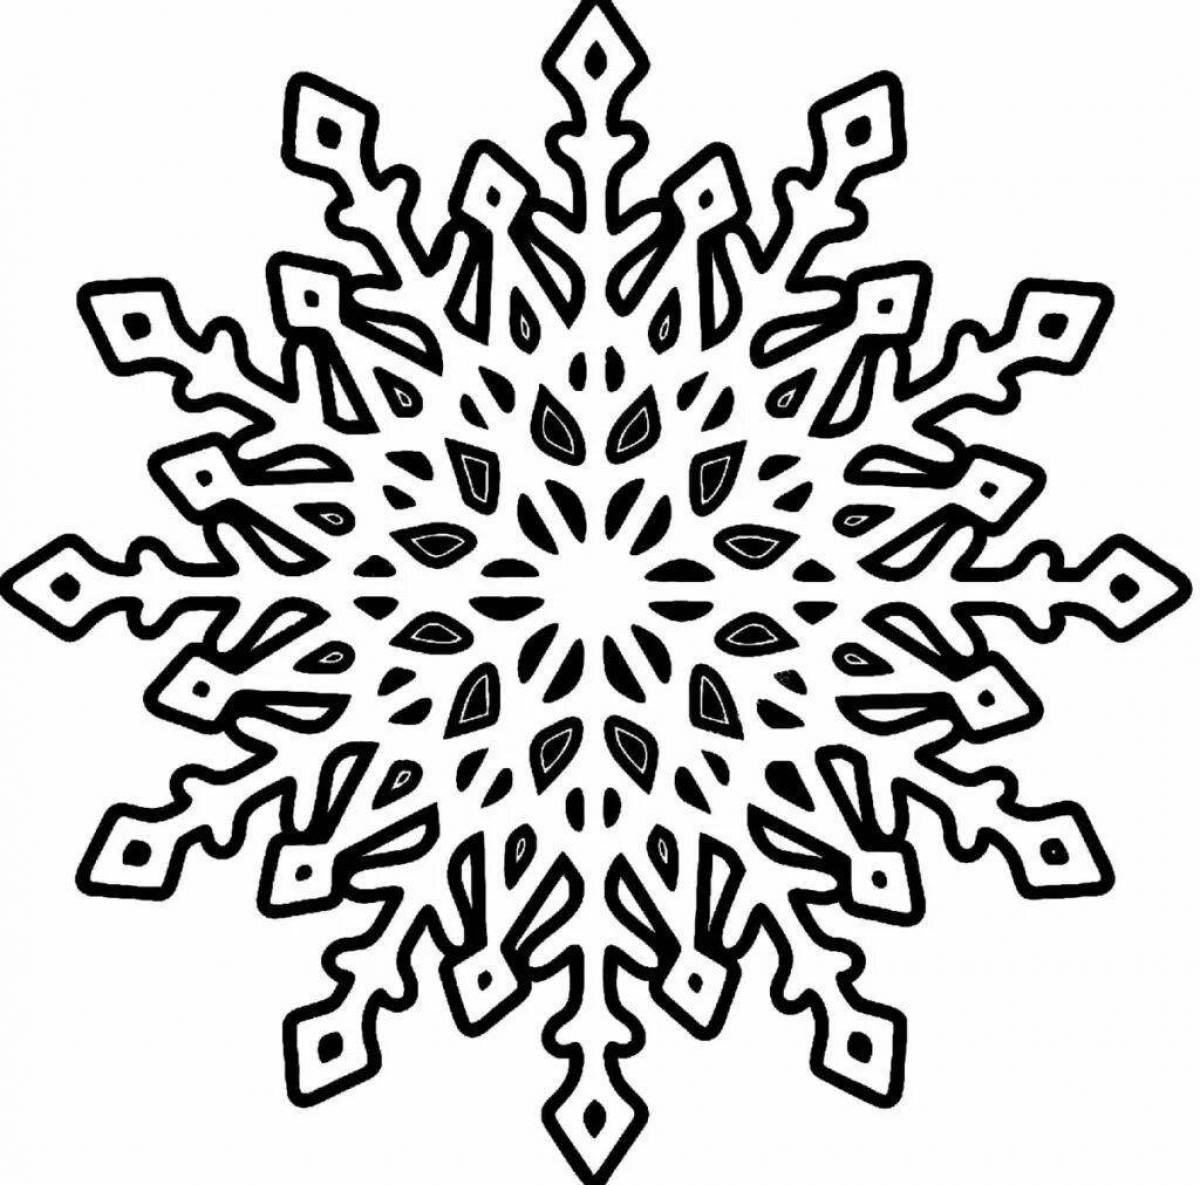 Snowflake for children 3 4 years old #4